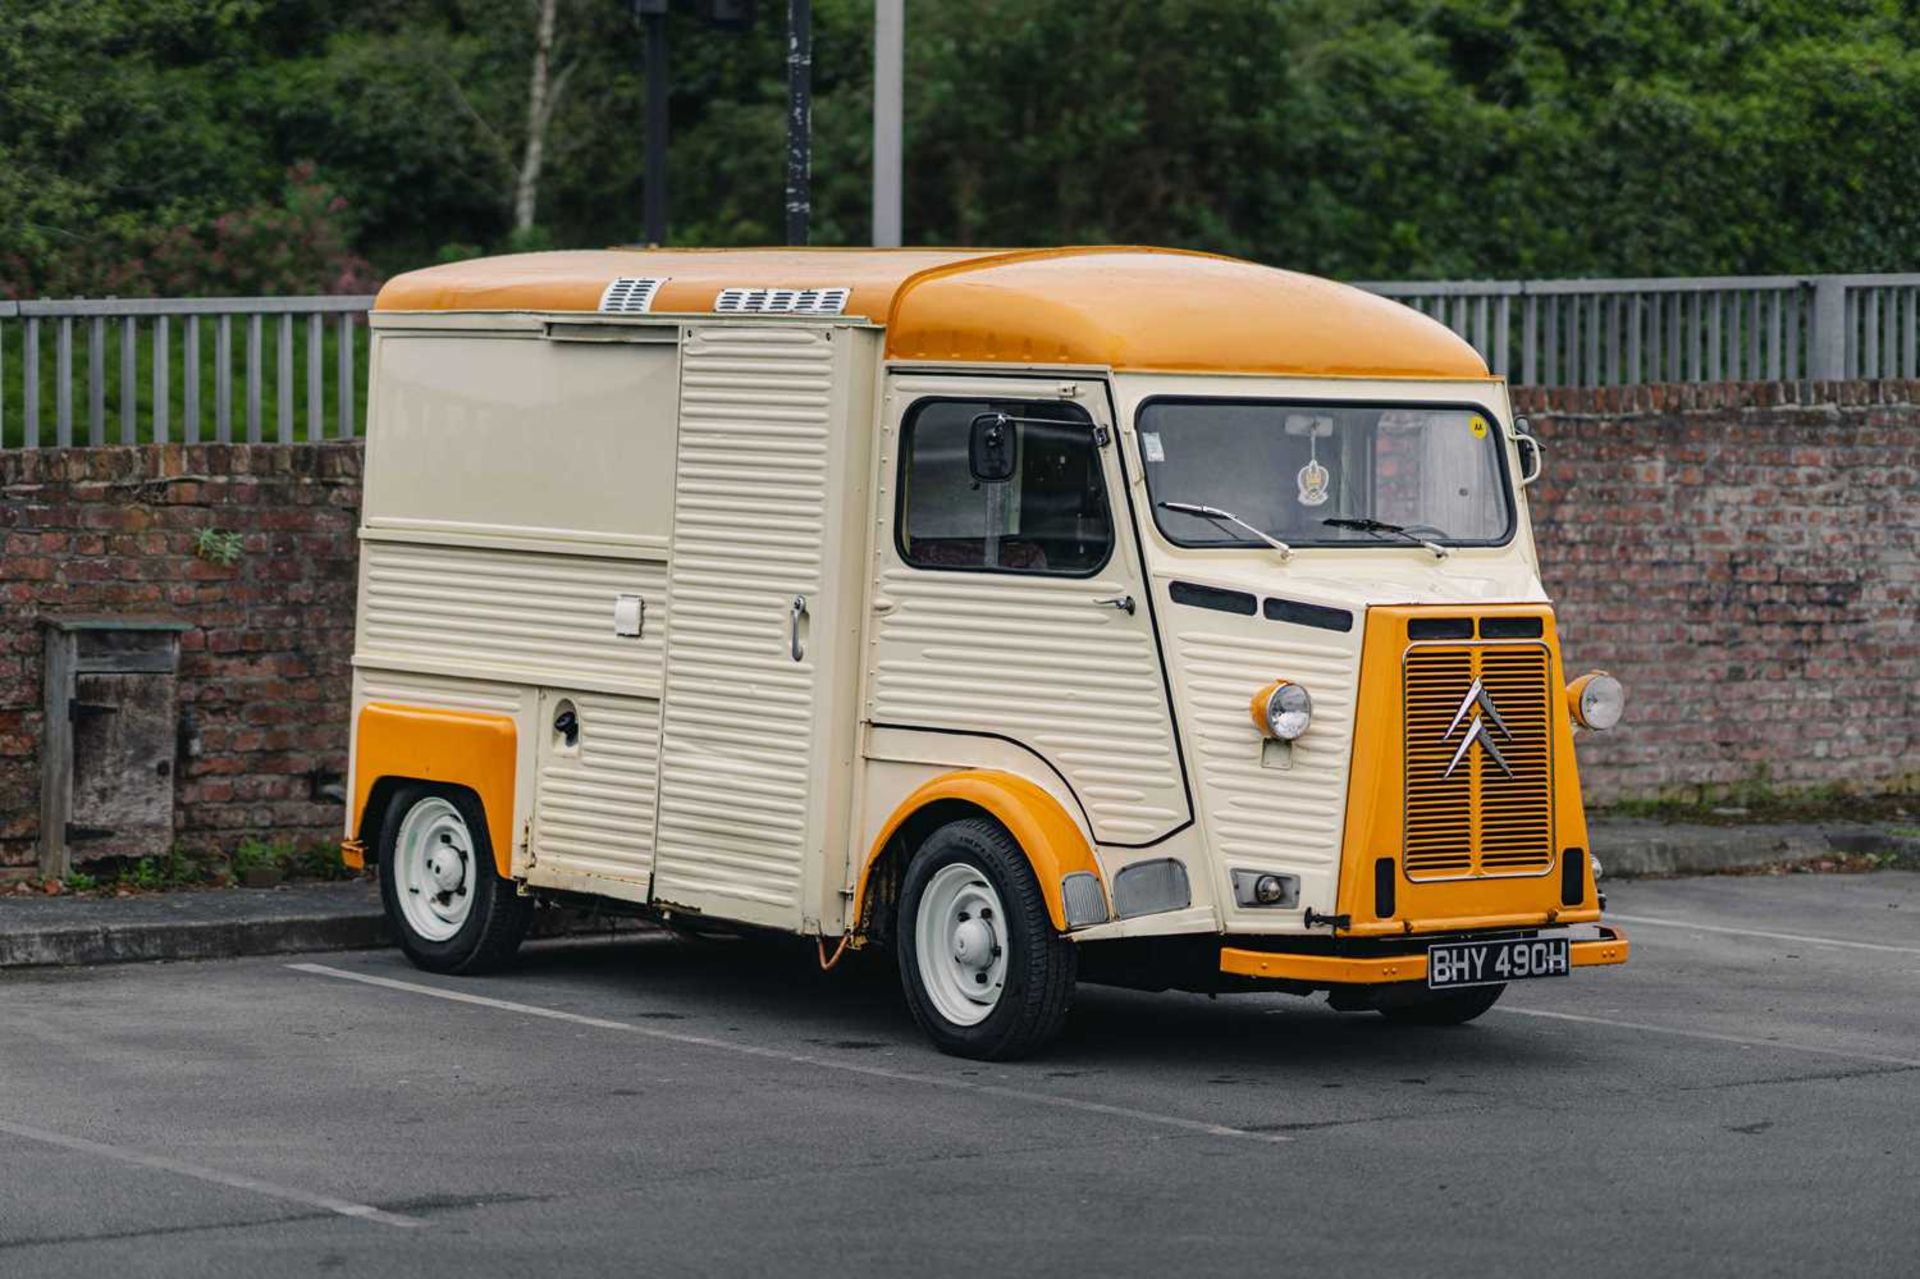 1970 Citroen HY Van Fully fitted-out boutique catering van ready to go into business